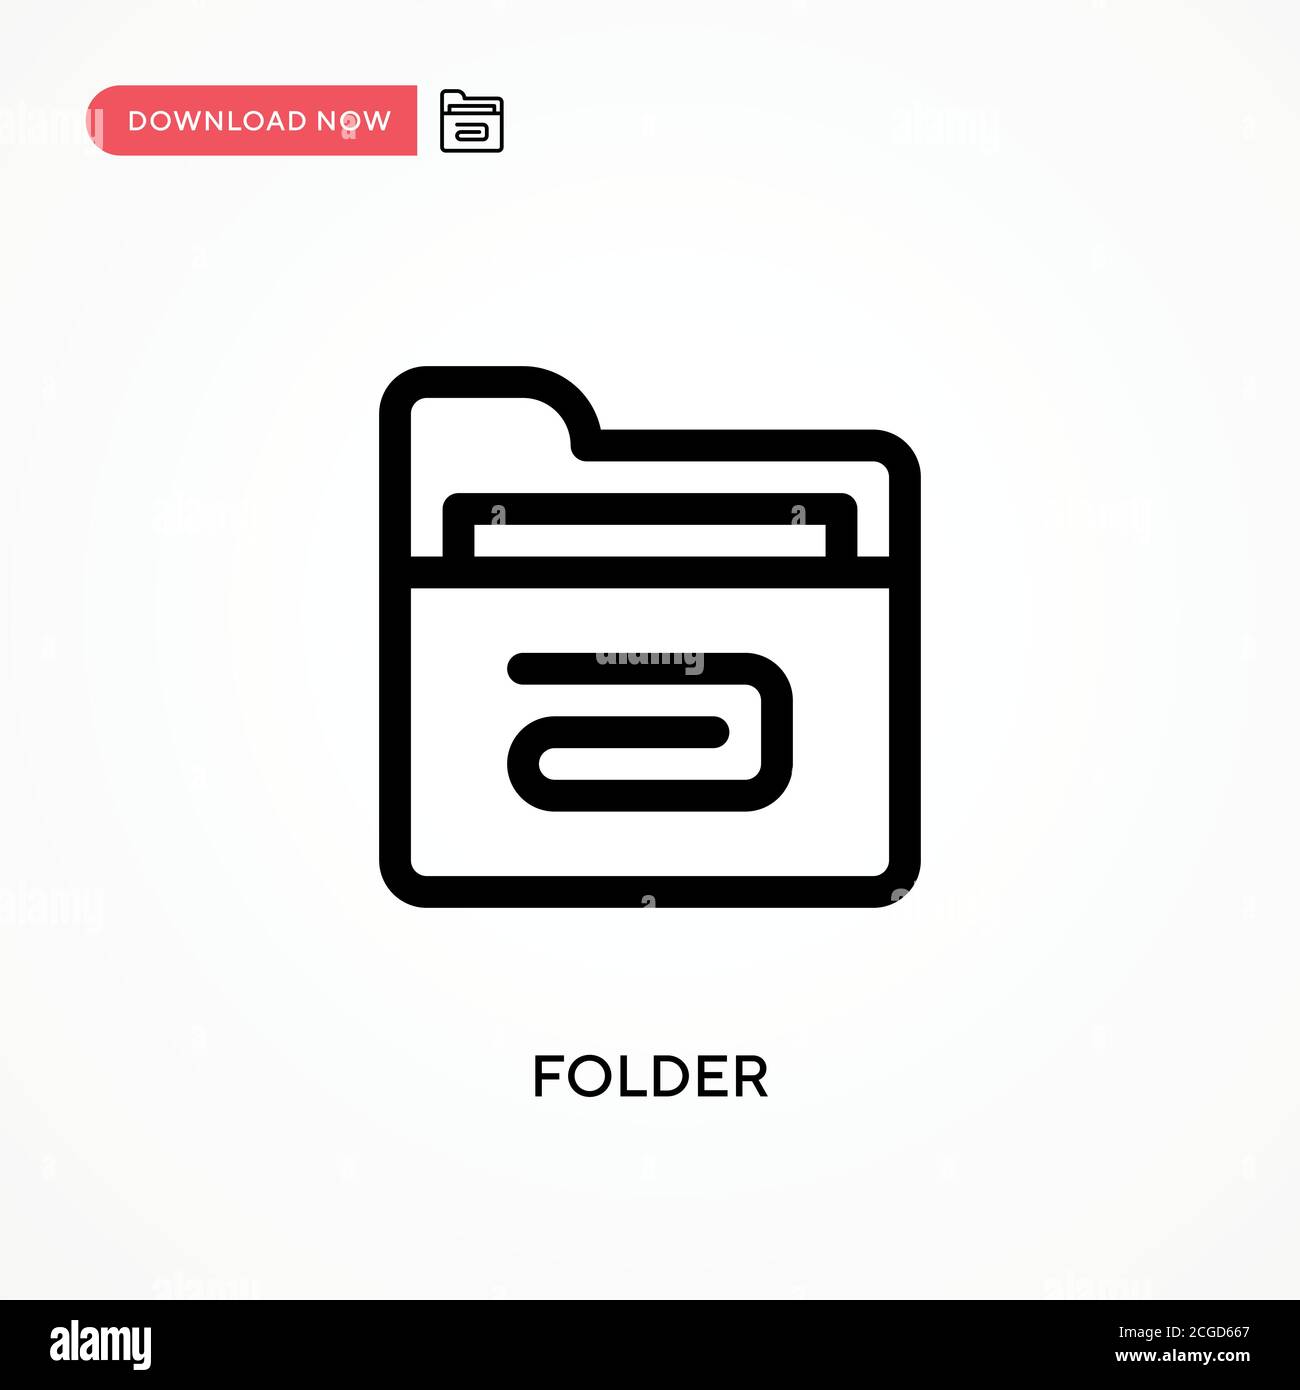 Folder Simple vector icon. Modern, simple flat vector illustration for web site or mobile app Stock Vector